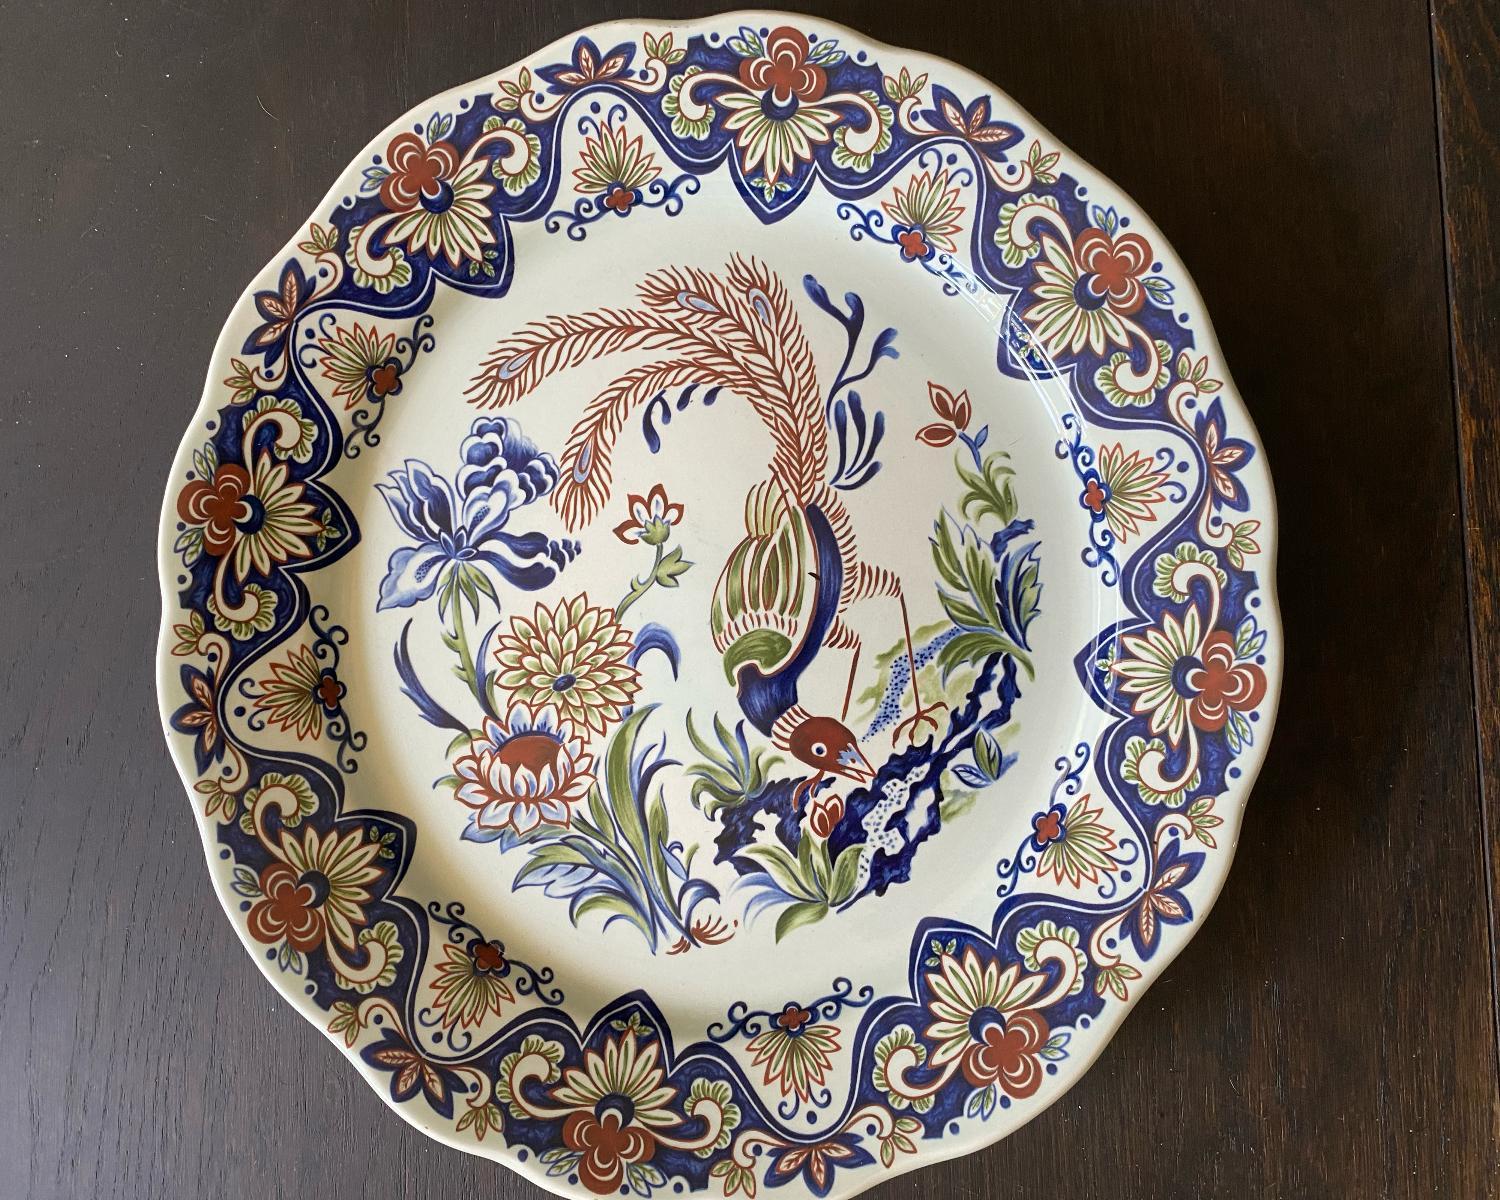 A beautiful handprinted large bowl of the Belgium Faience factory Boch. Nicely painted with a peacock and flowers. This items is in a very good condition. 
Markings Vieux Rhodes Boch Belgium.